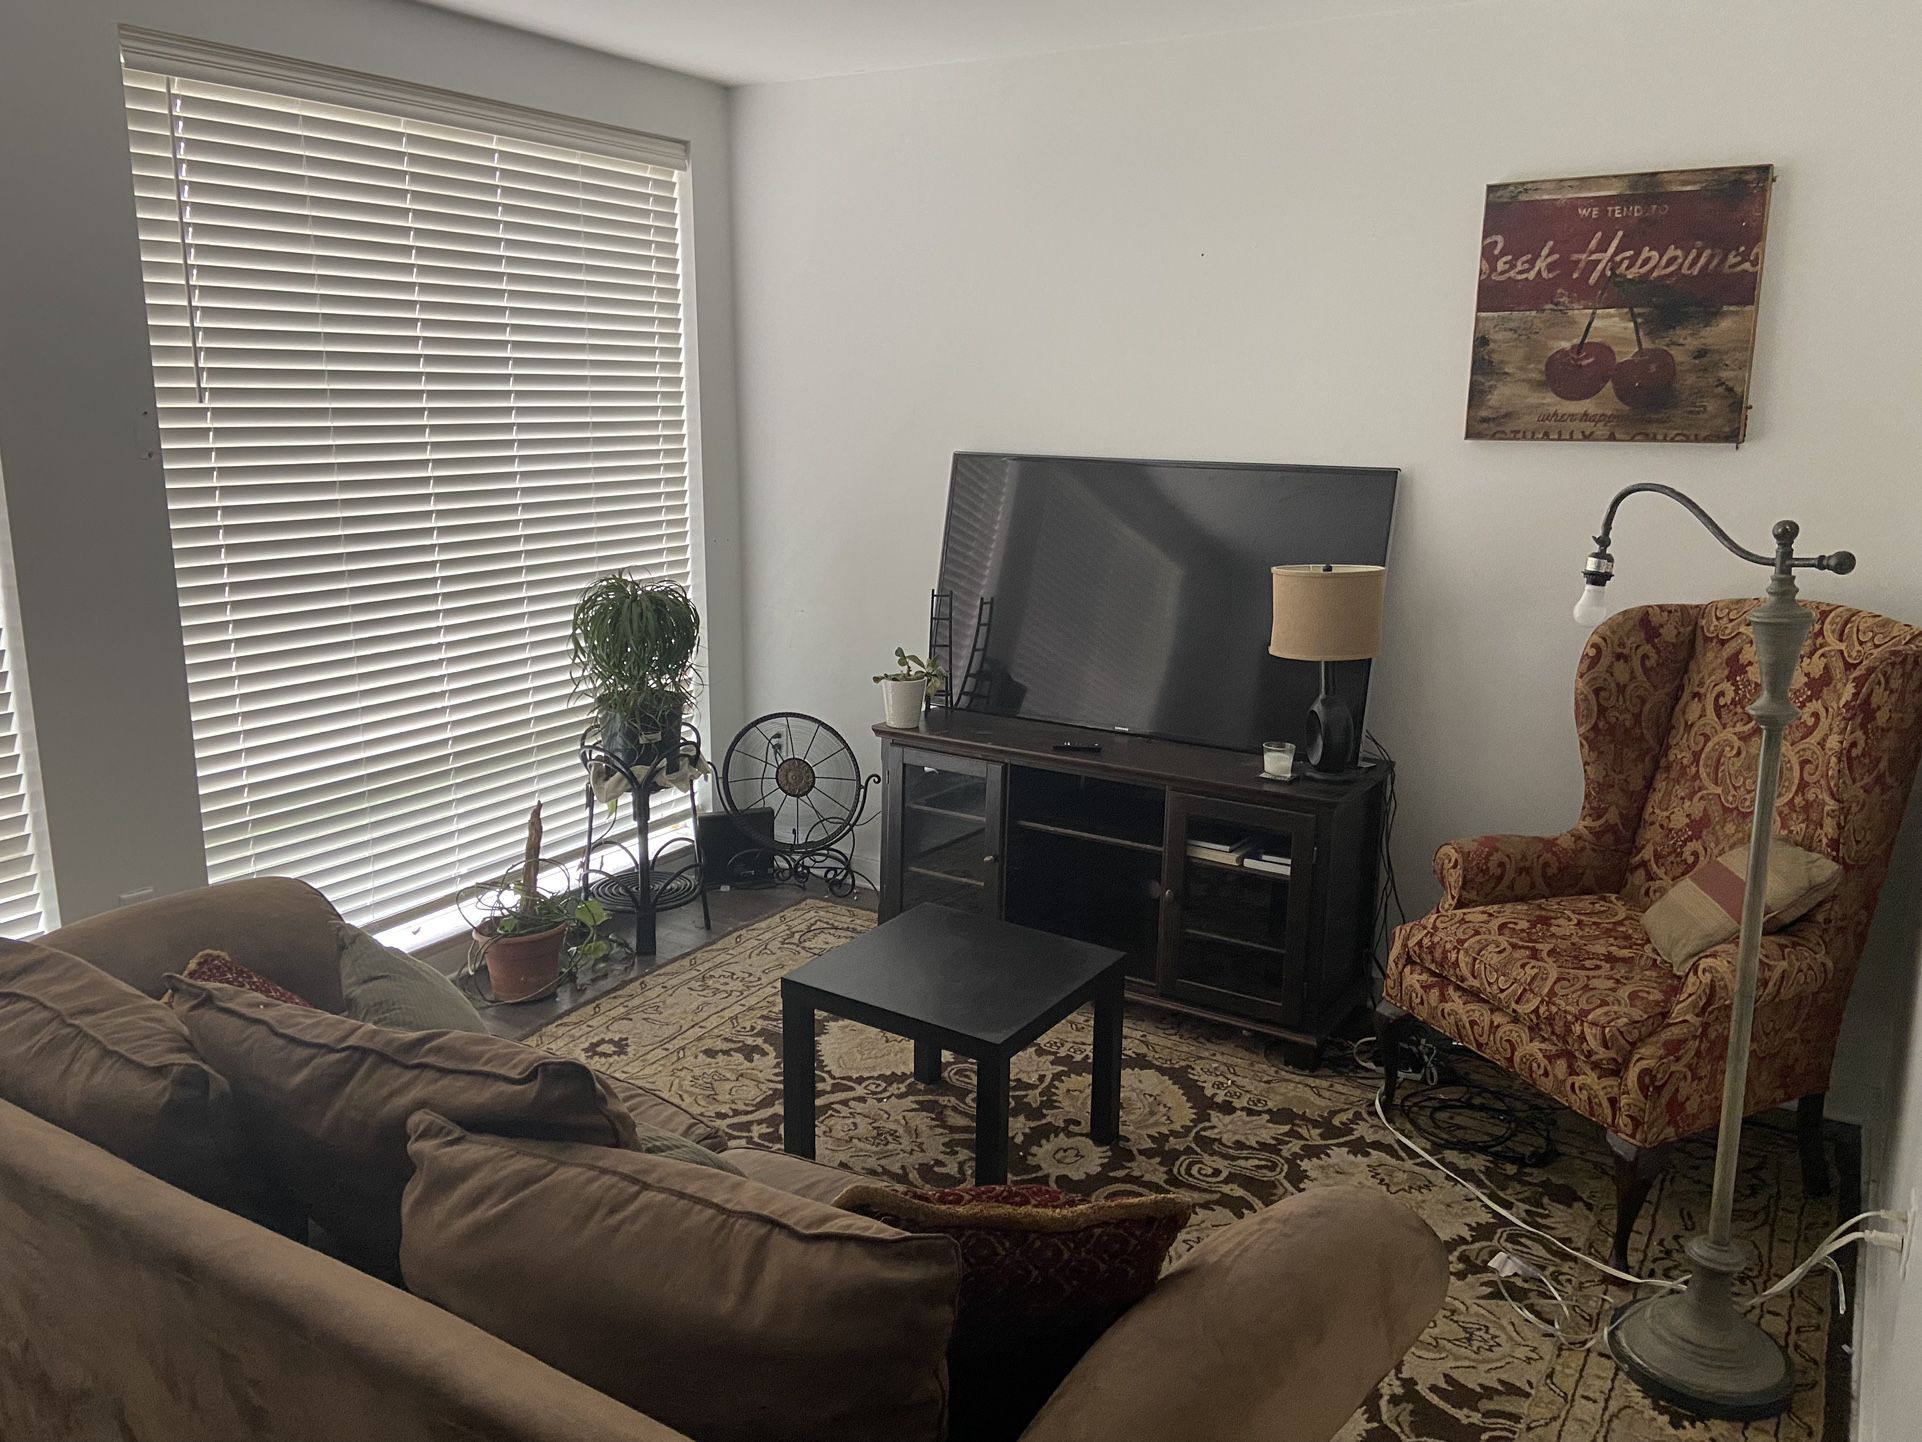 Full Living Room Set (everything seen in picture) 